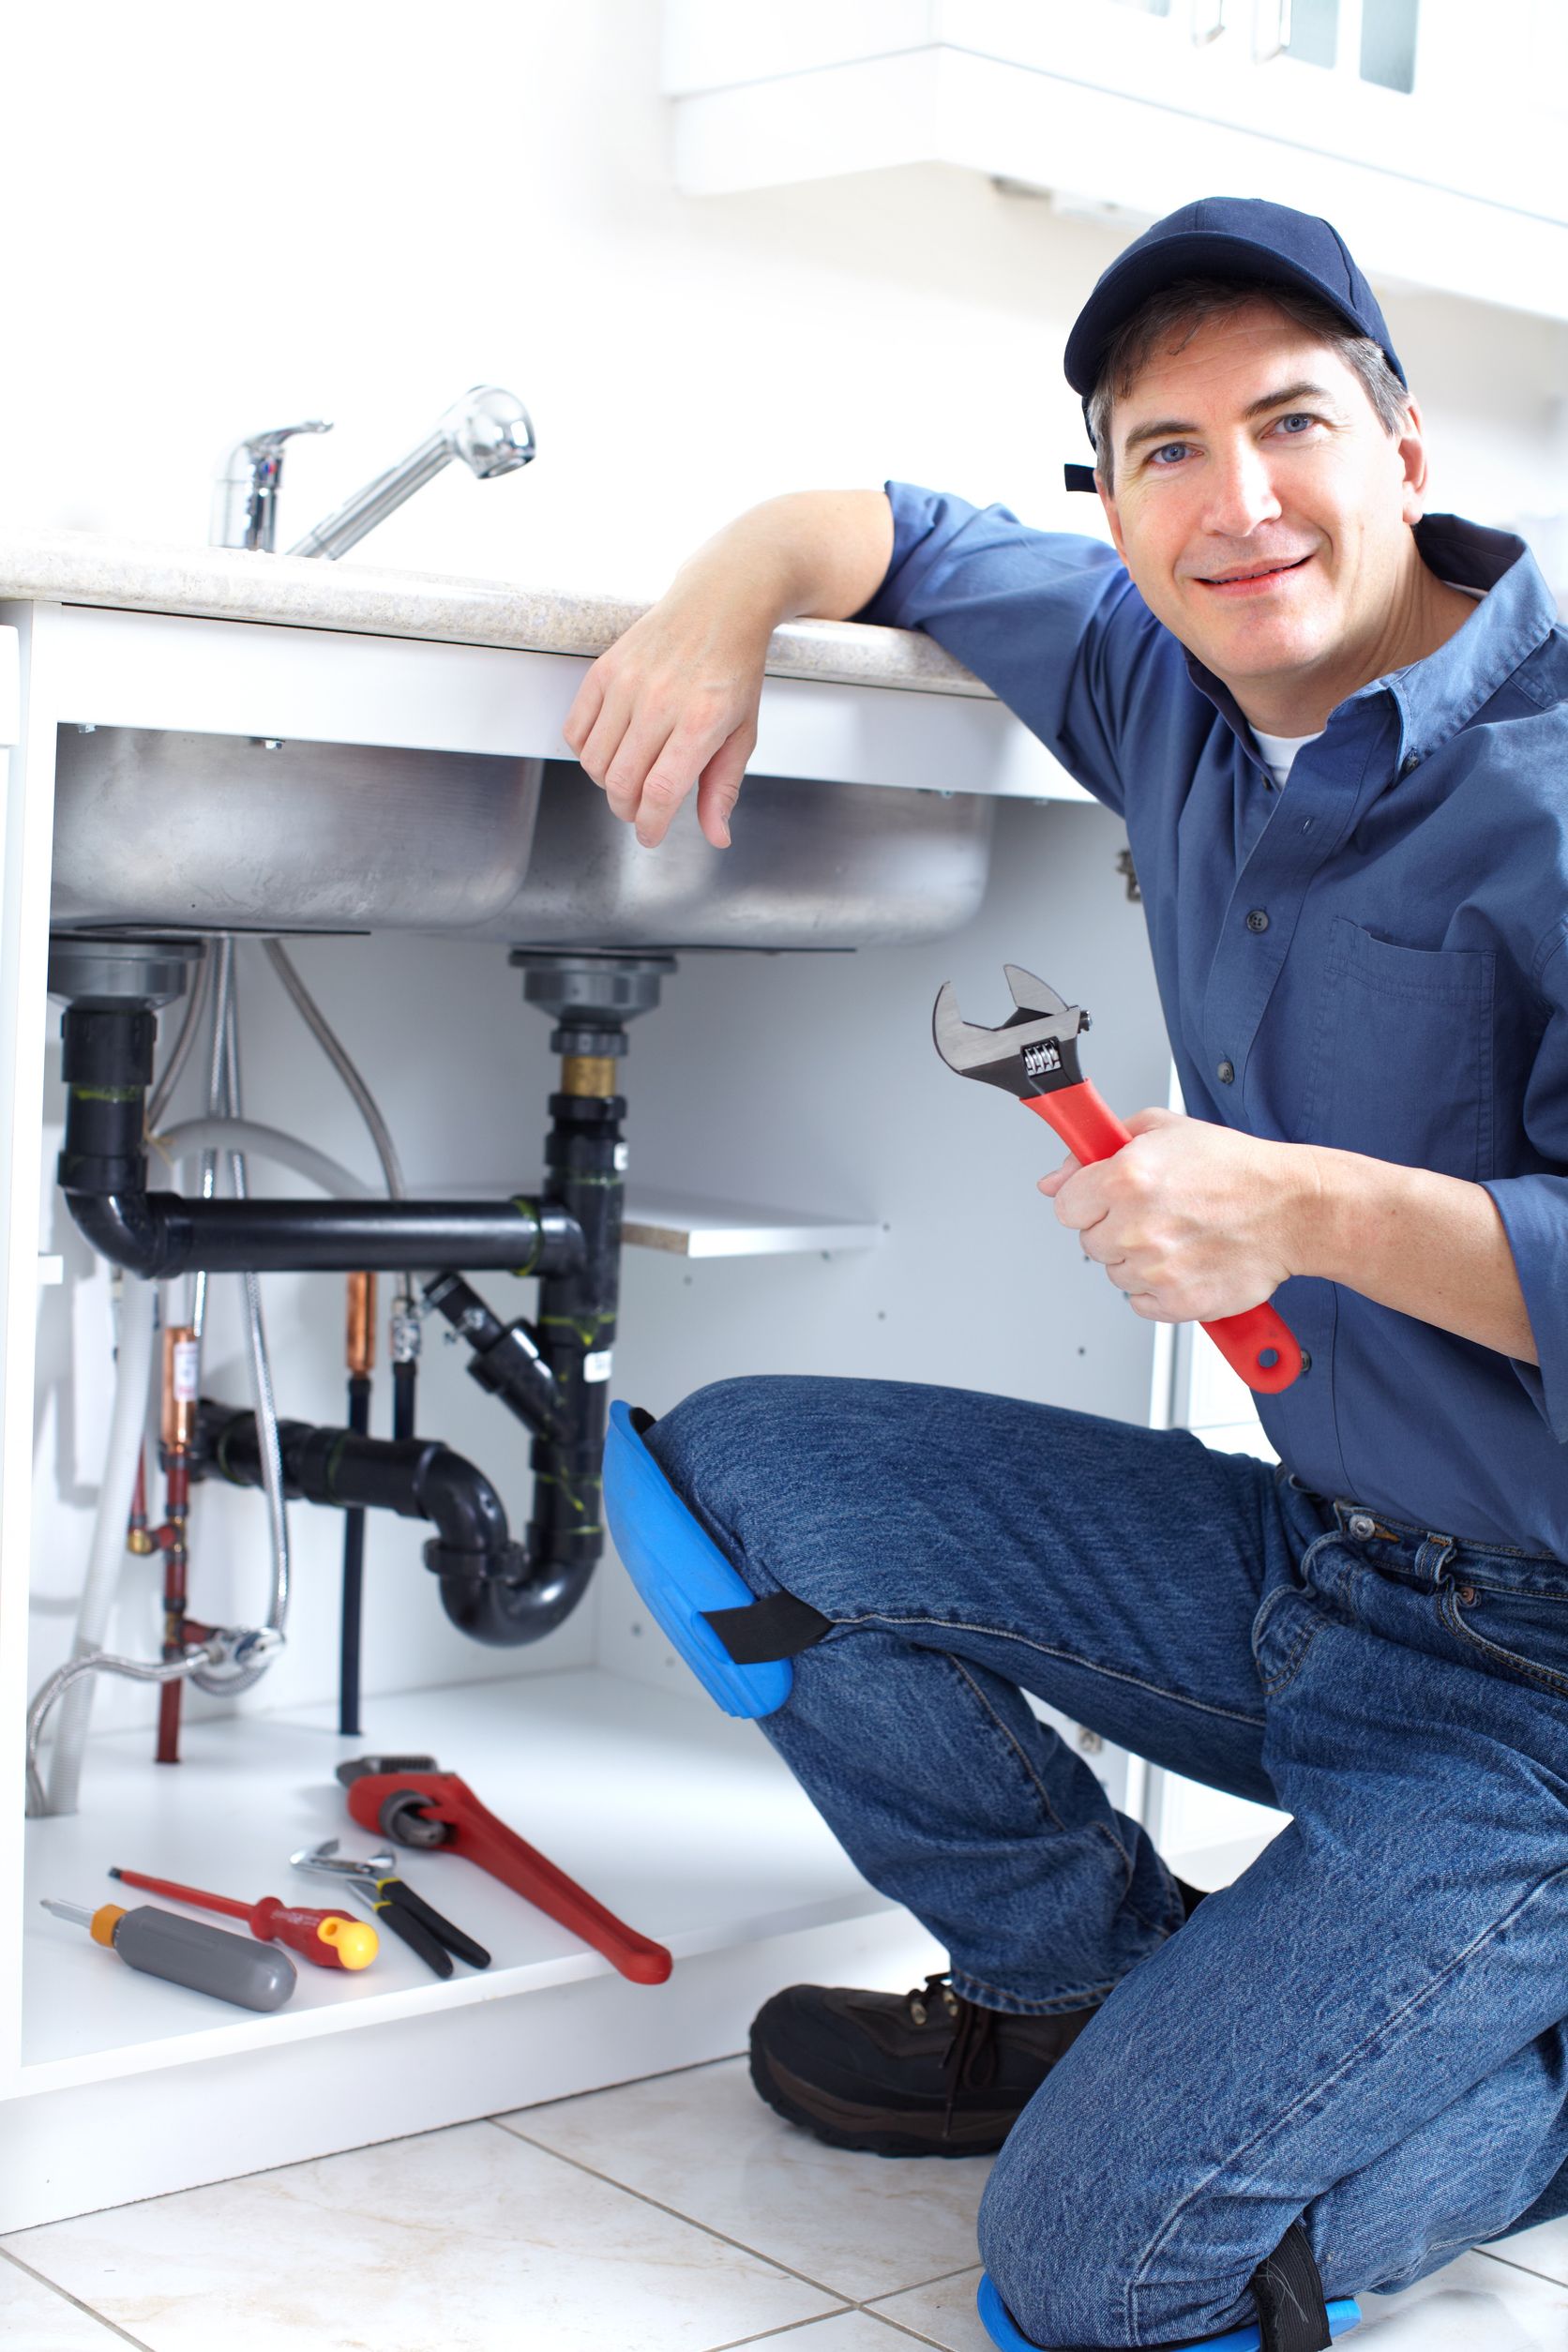 Don’t Wait to Contact a Plumber in Vero Beach, FL When You Have a Back-up